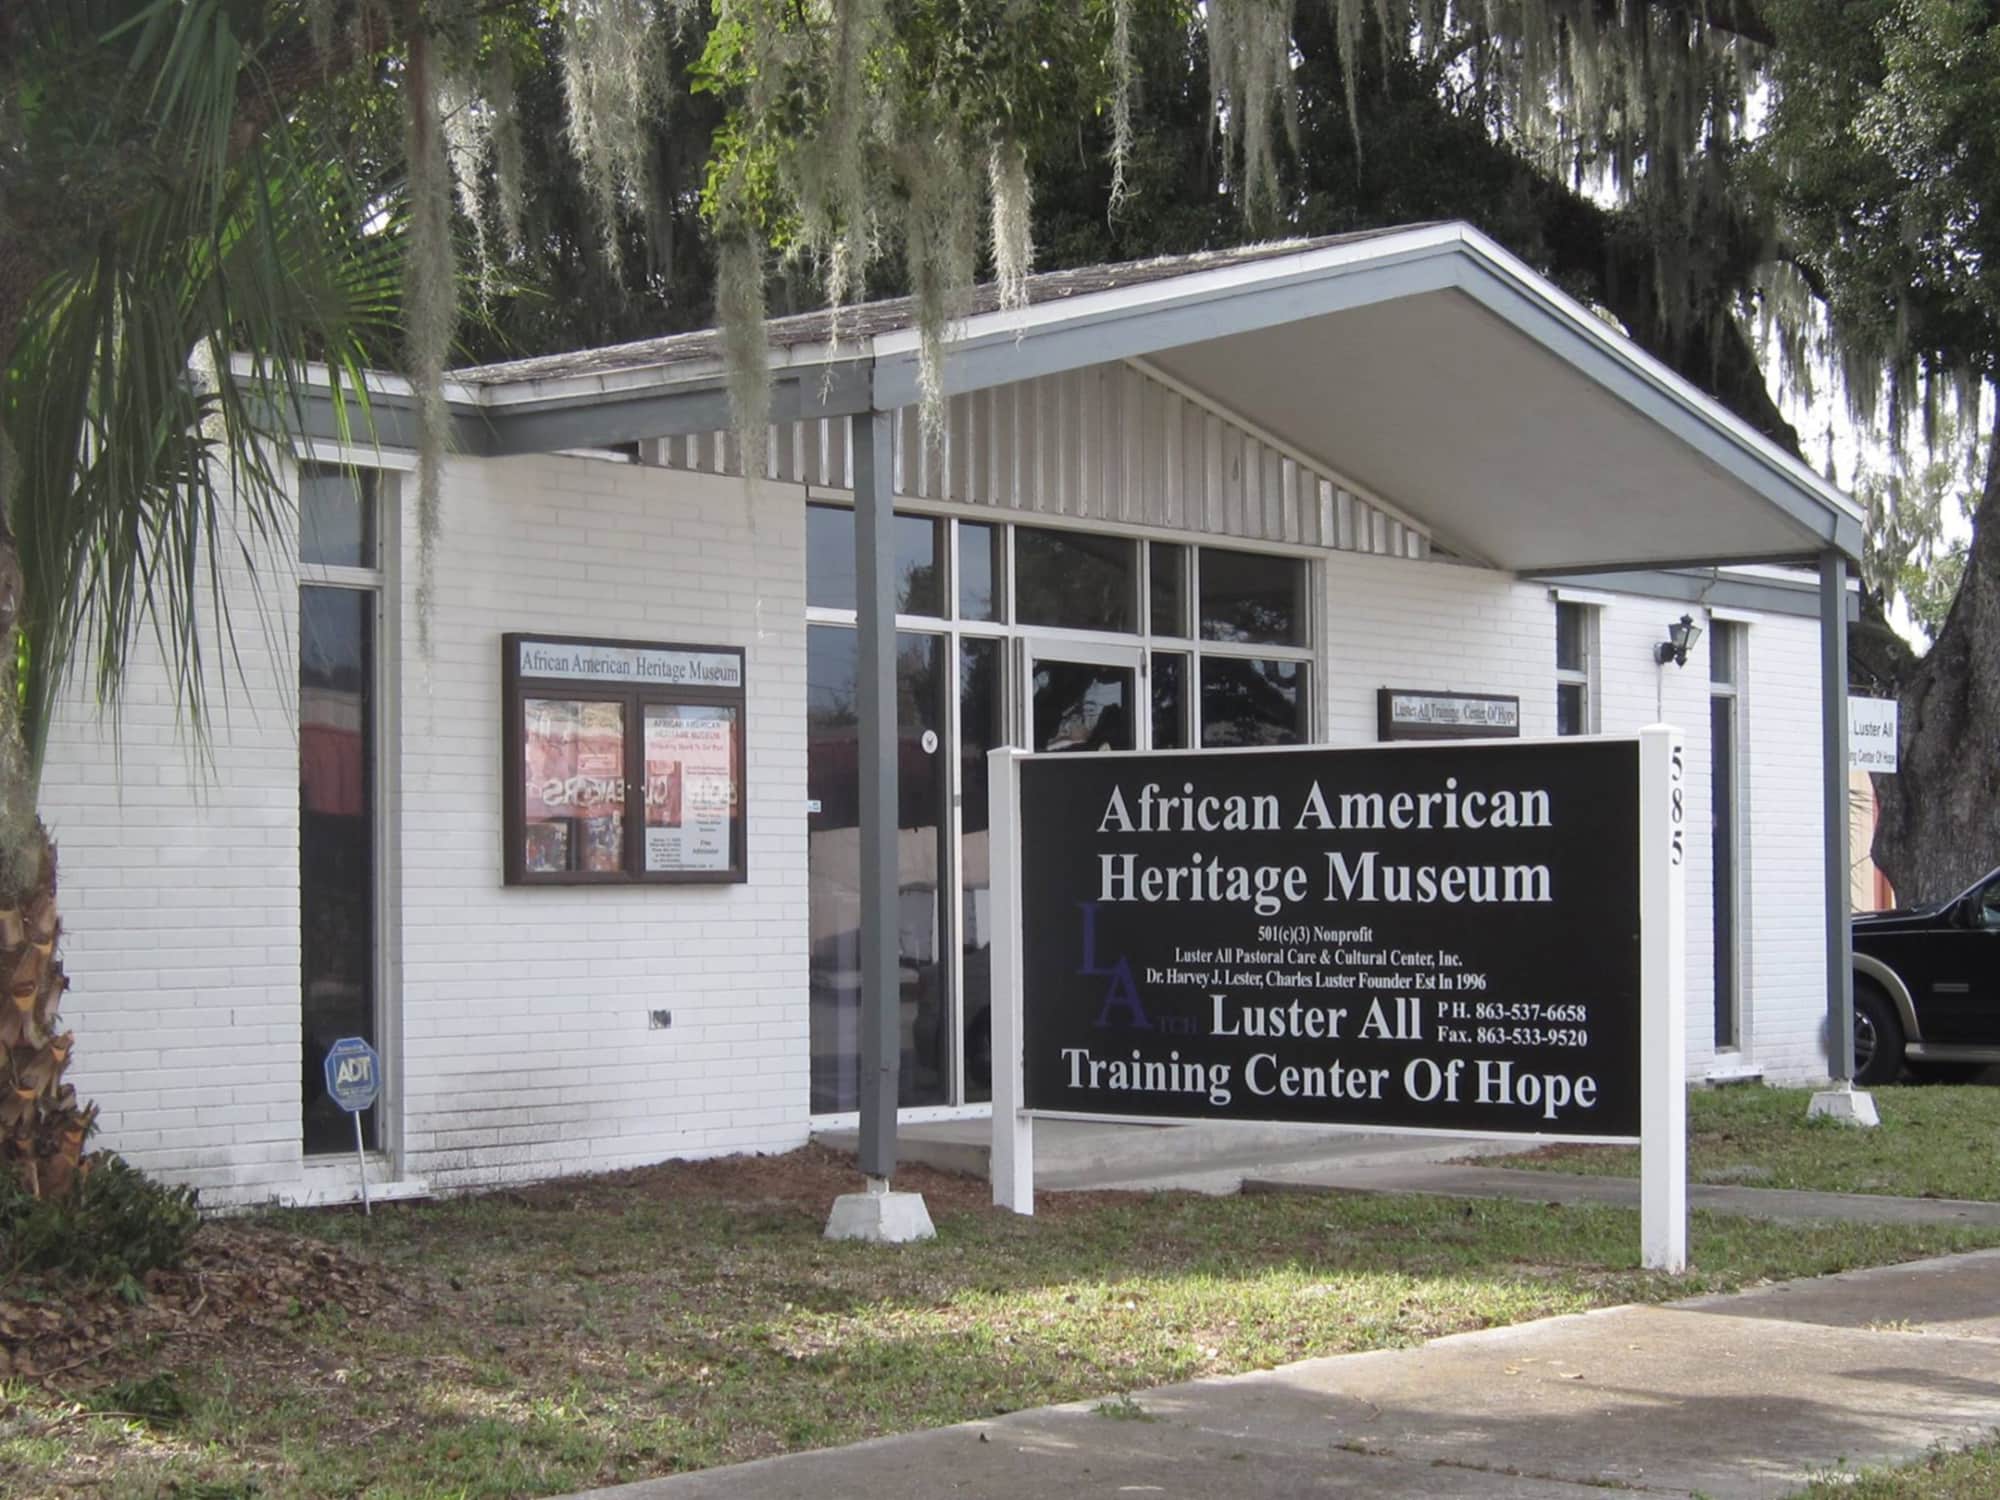 Exterior of entrance and sign at African American Heritage Museum and Luster All Training Center of Hope in Bartow, FL